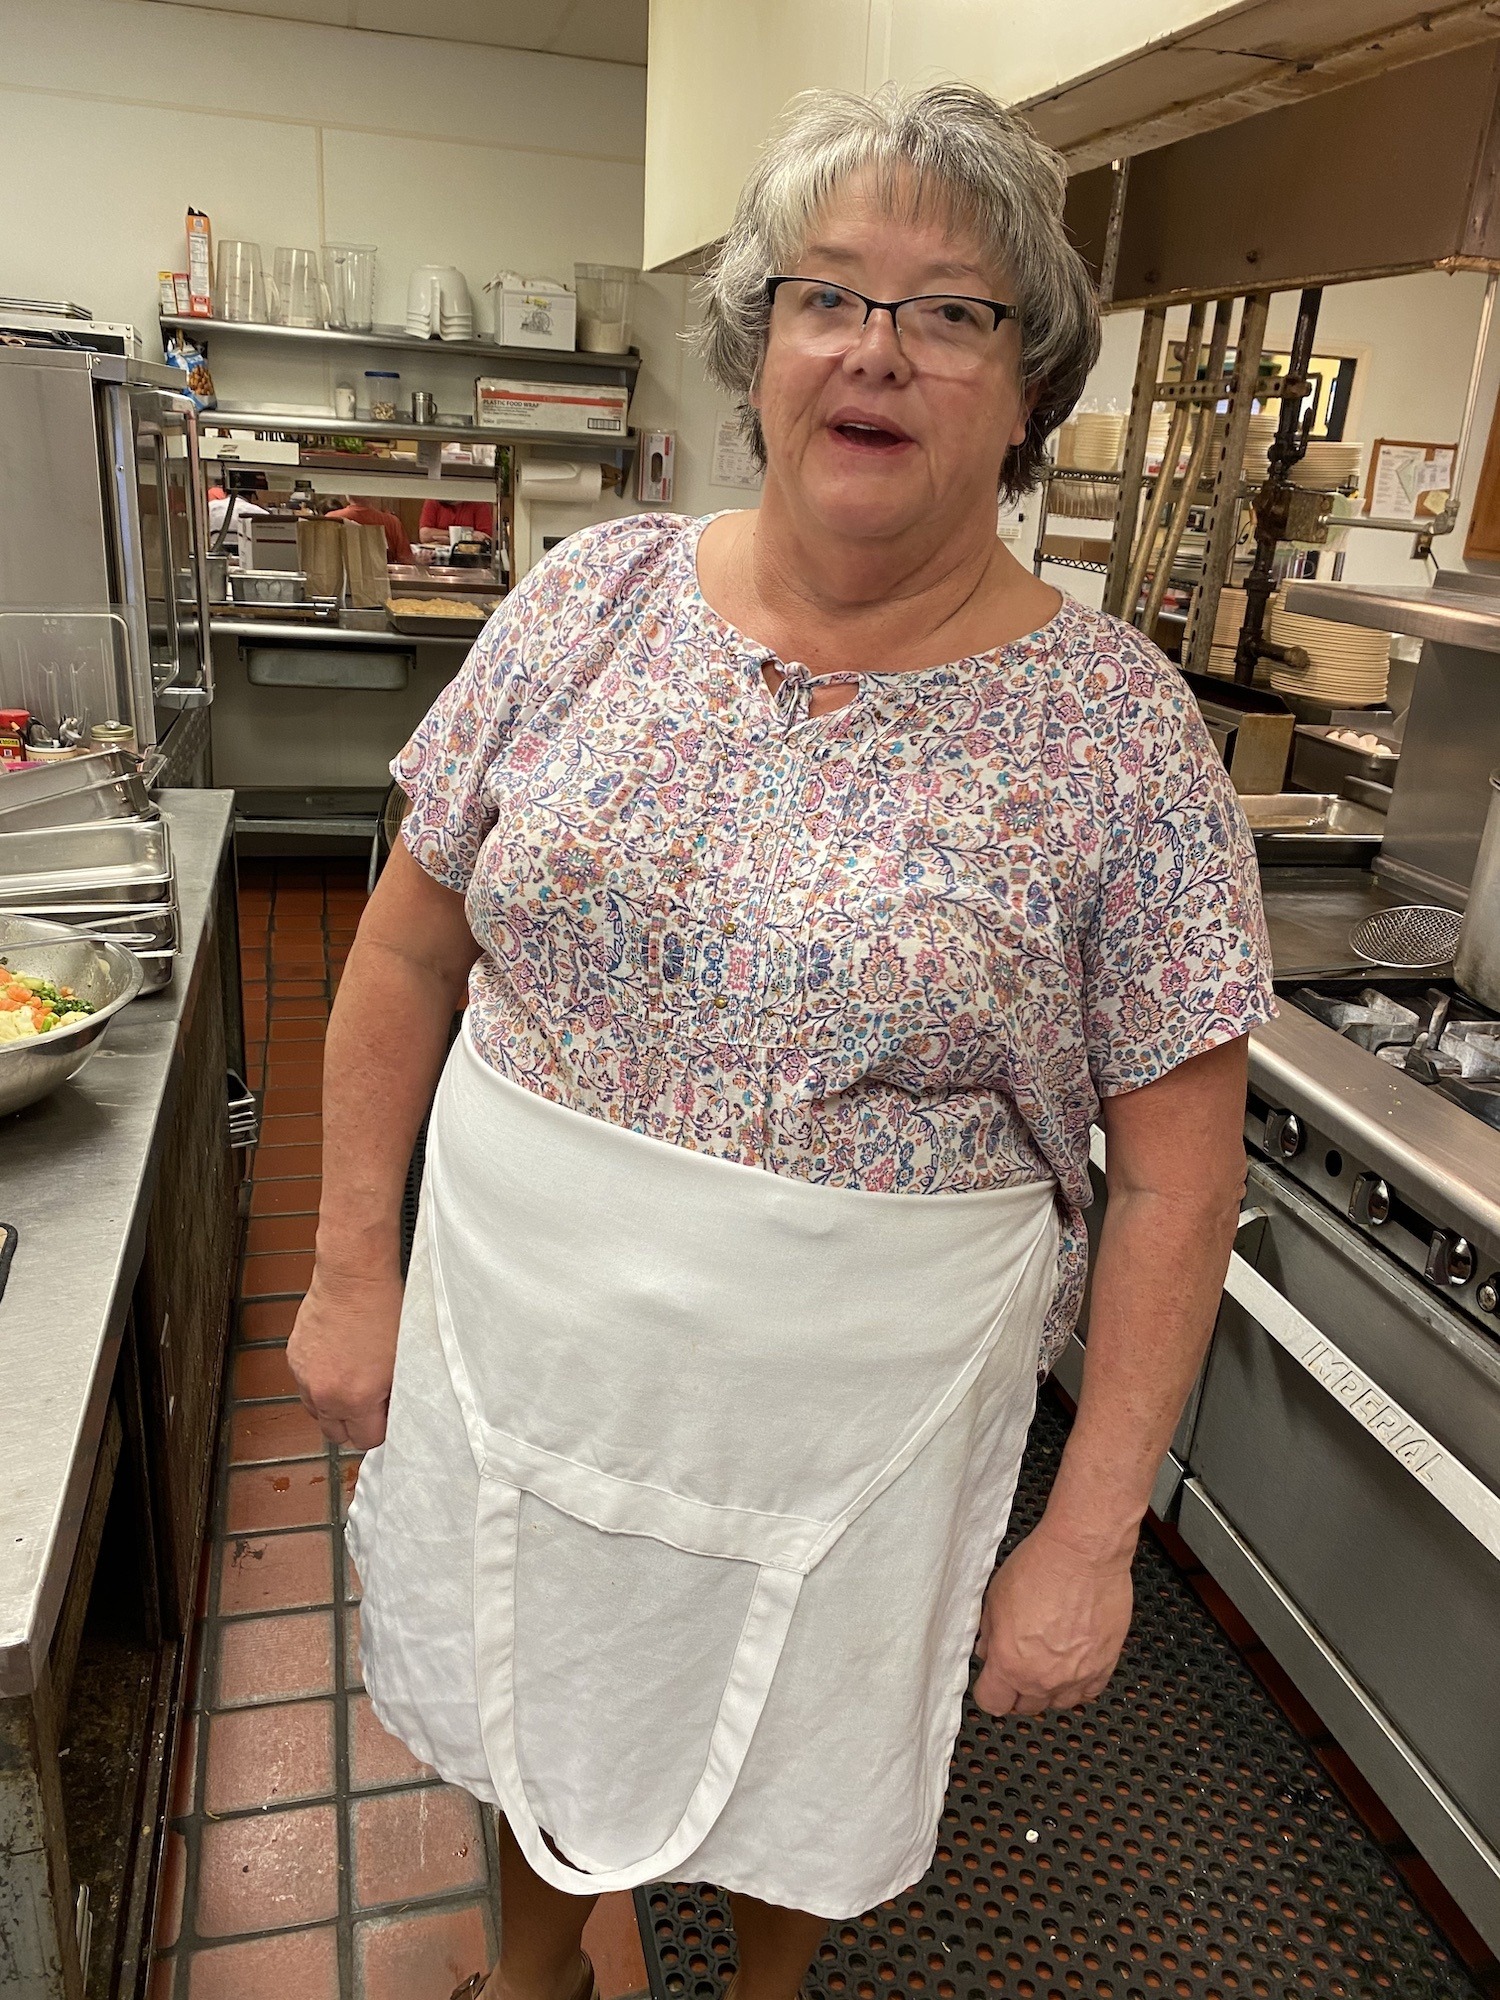 Jackie Sinclair, owner of Ila Restaurant, stands with an apron in the kitchen. January 2022